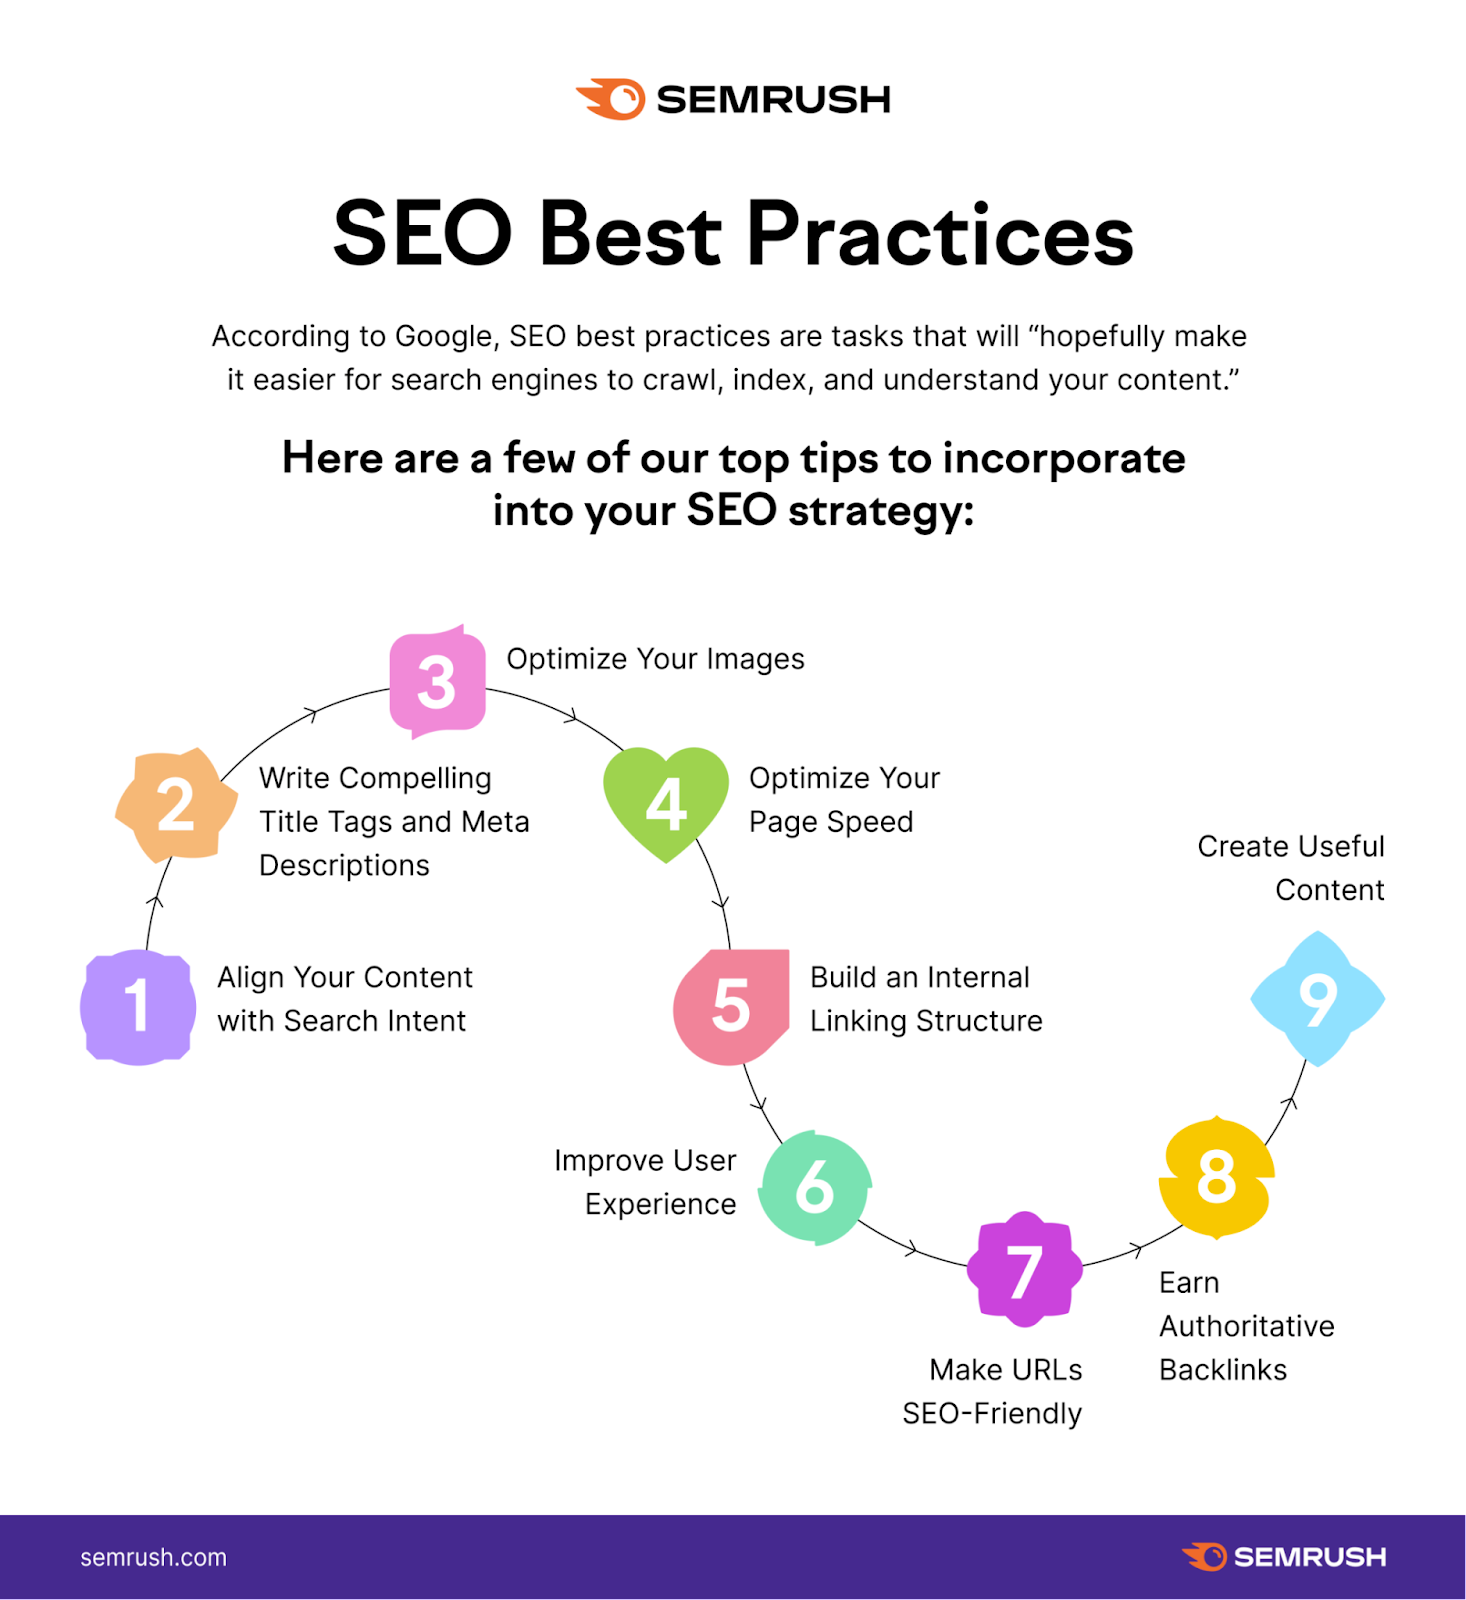 SEO best practices for organic traffic